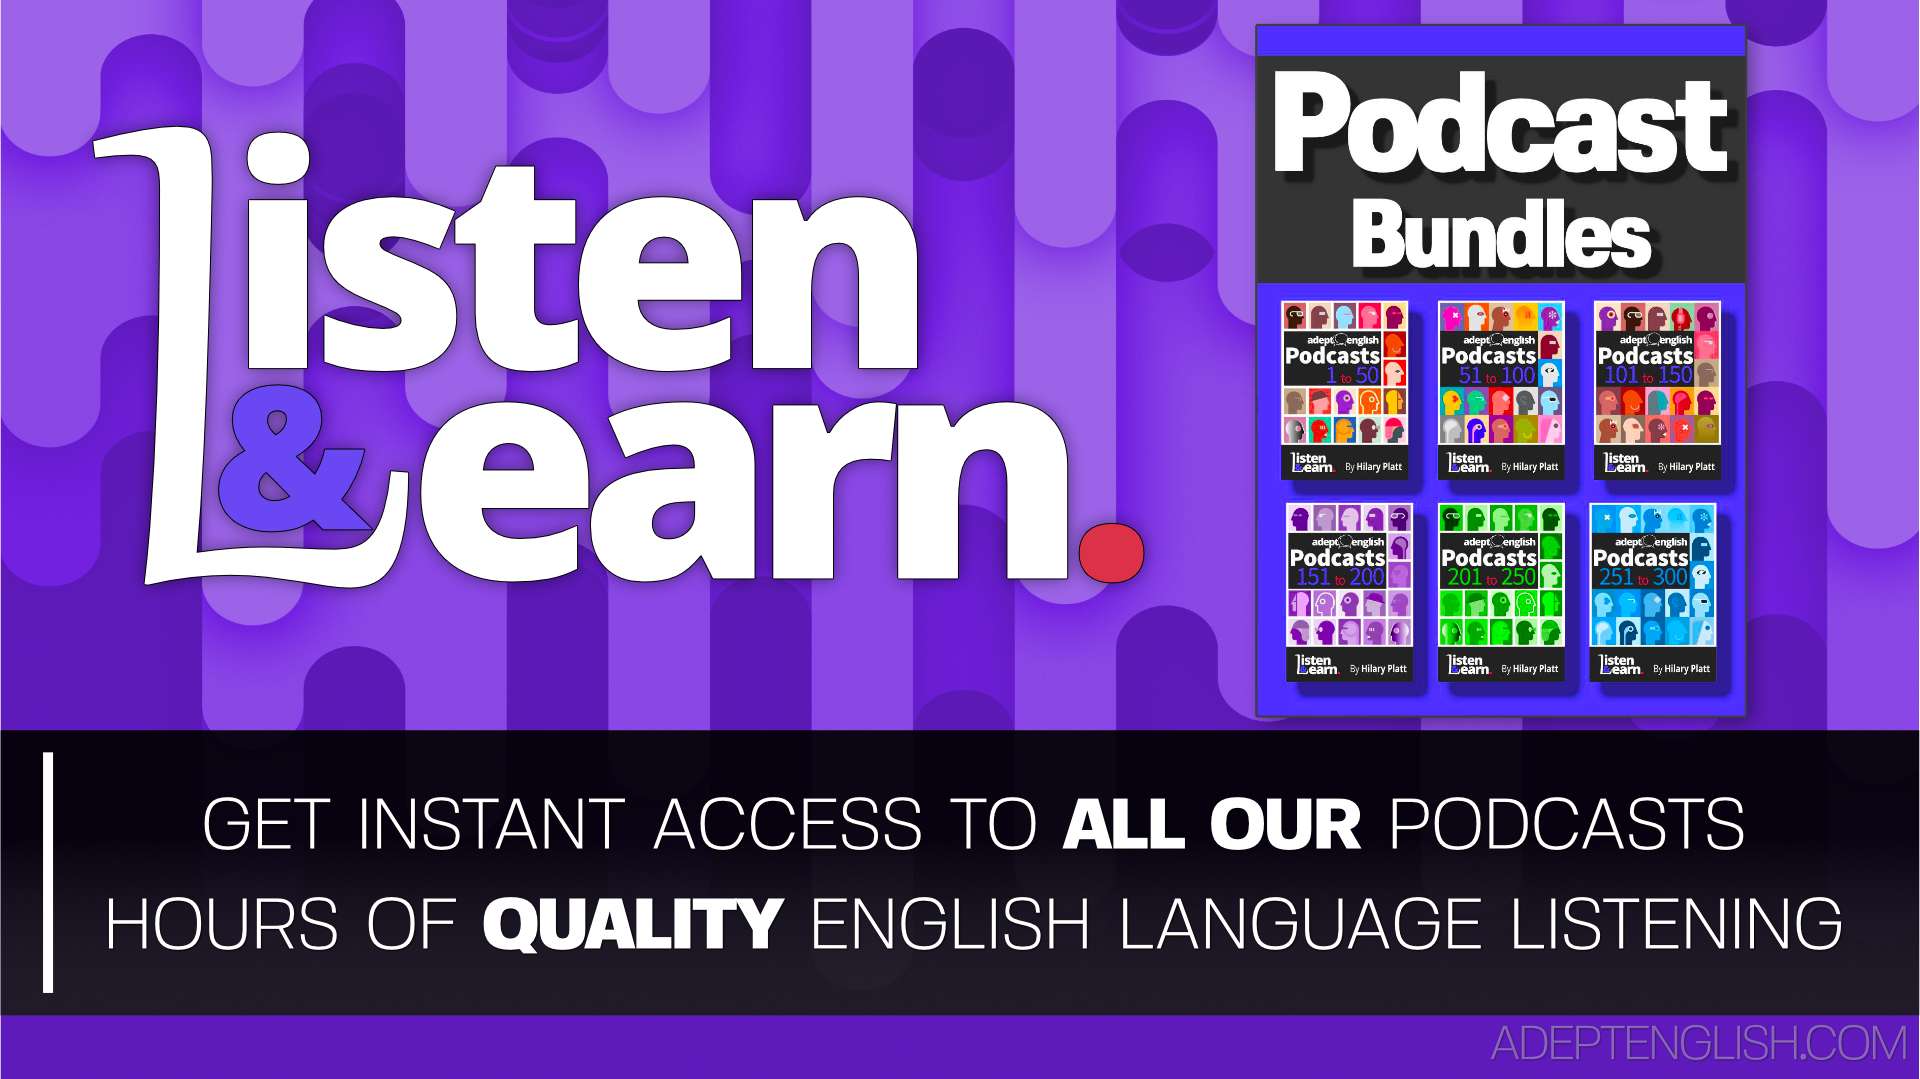 Adept English has published over 300 FREE English language audio lessons with a full transcript included with every lesson.